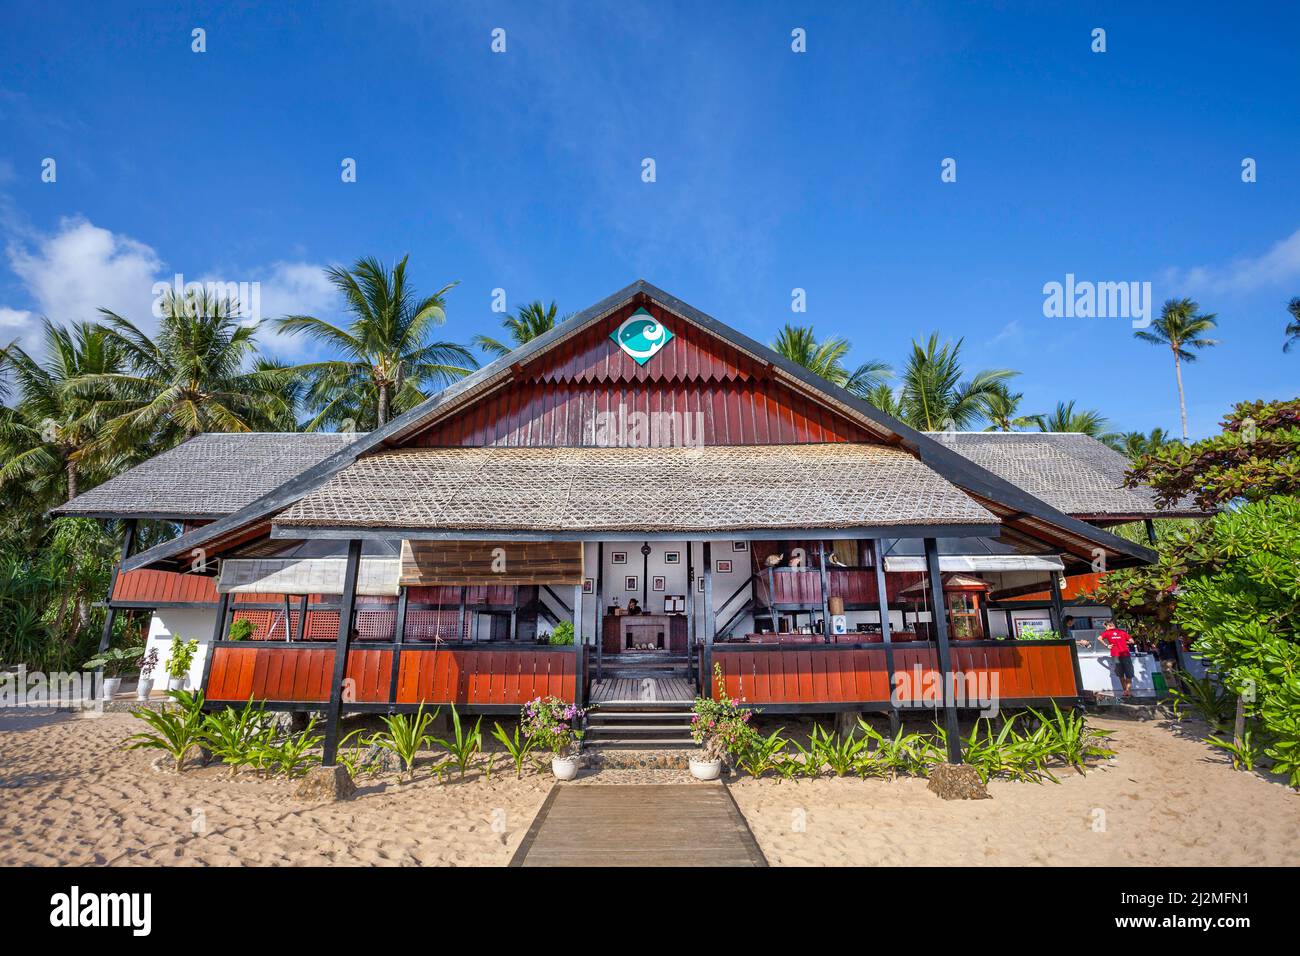 The main lobby and office of the diving resort, Wakatobi, Indonesia. The dive shop is just to the right of this building. Stock Photo